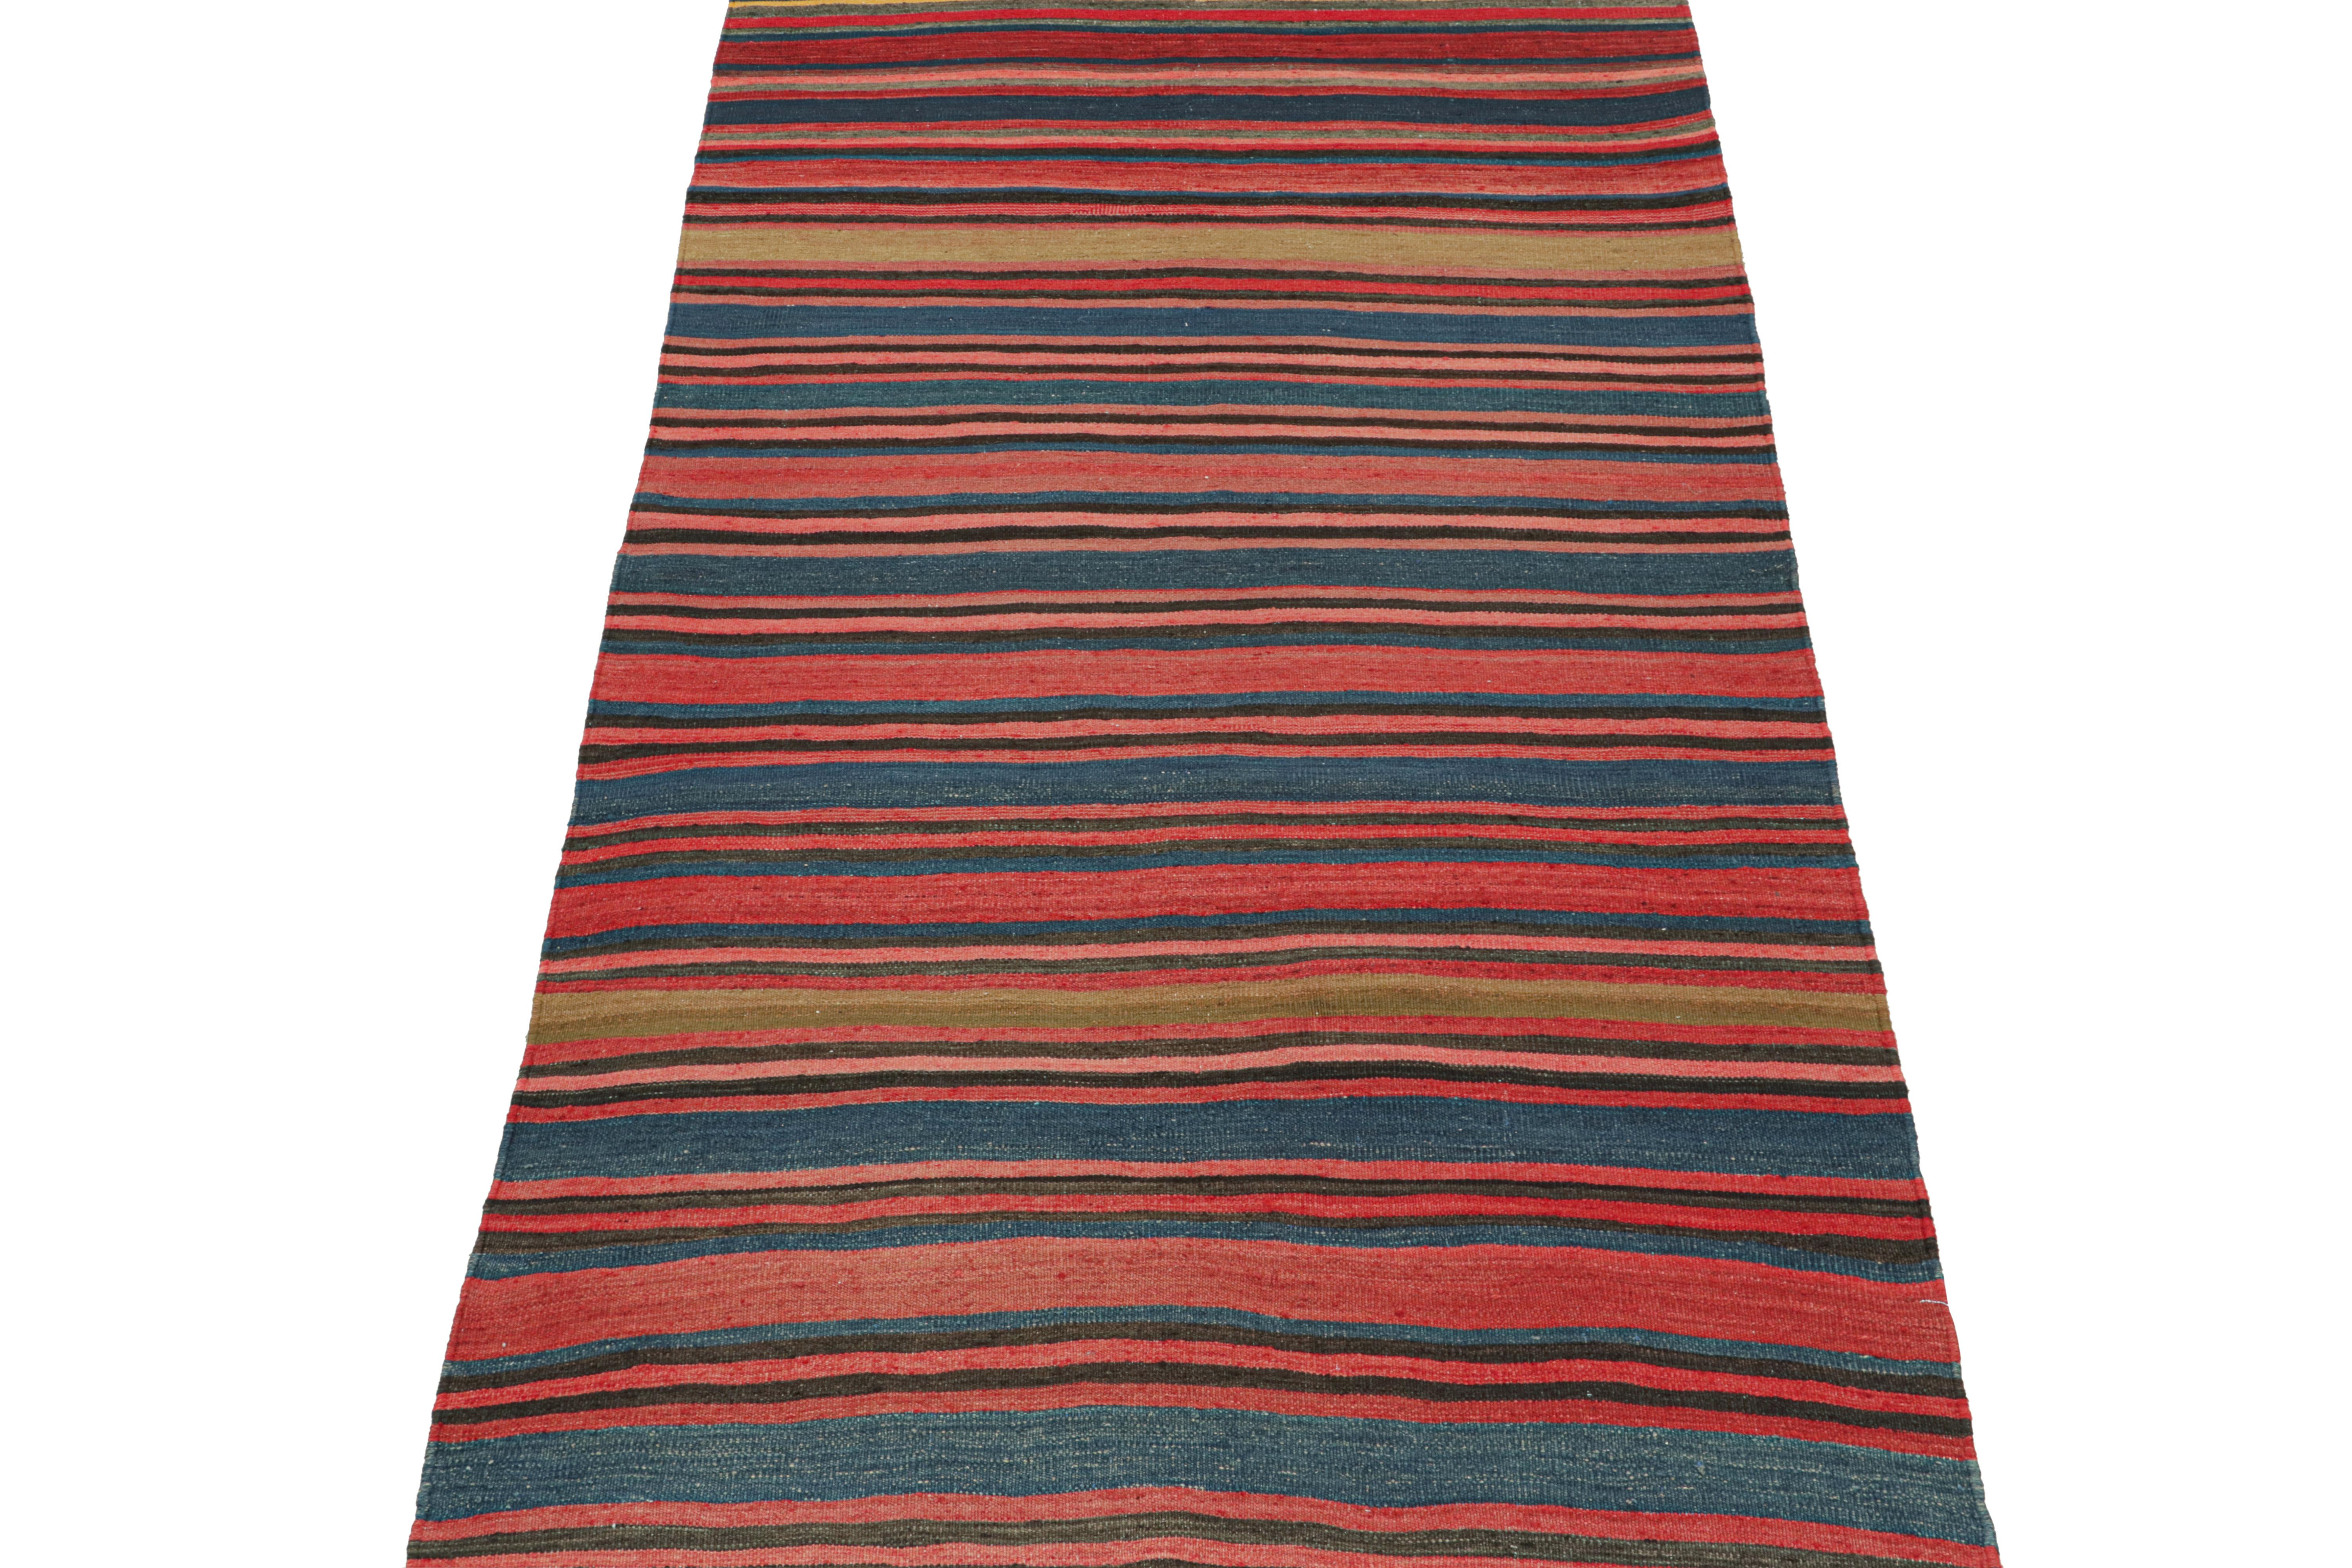 Vintage Bidjar Persian Kilim in Red with Multicolor Stripes In Good Condition For Sale In Long Island City, NY